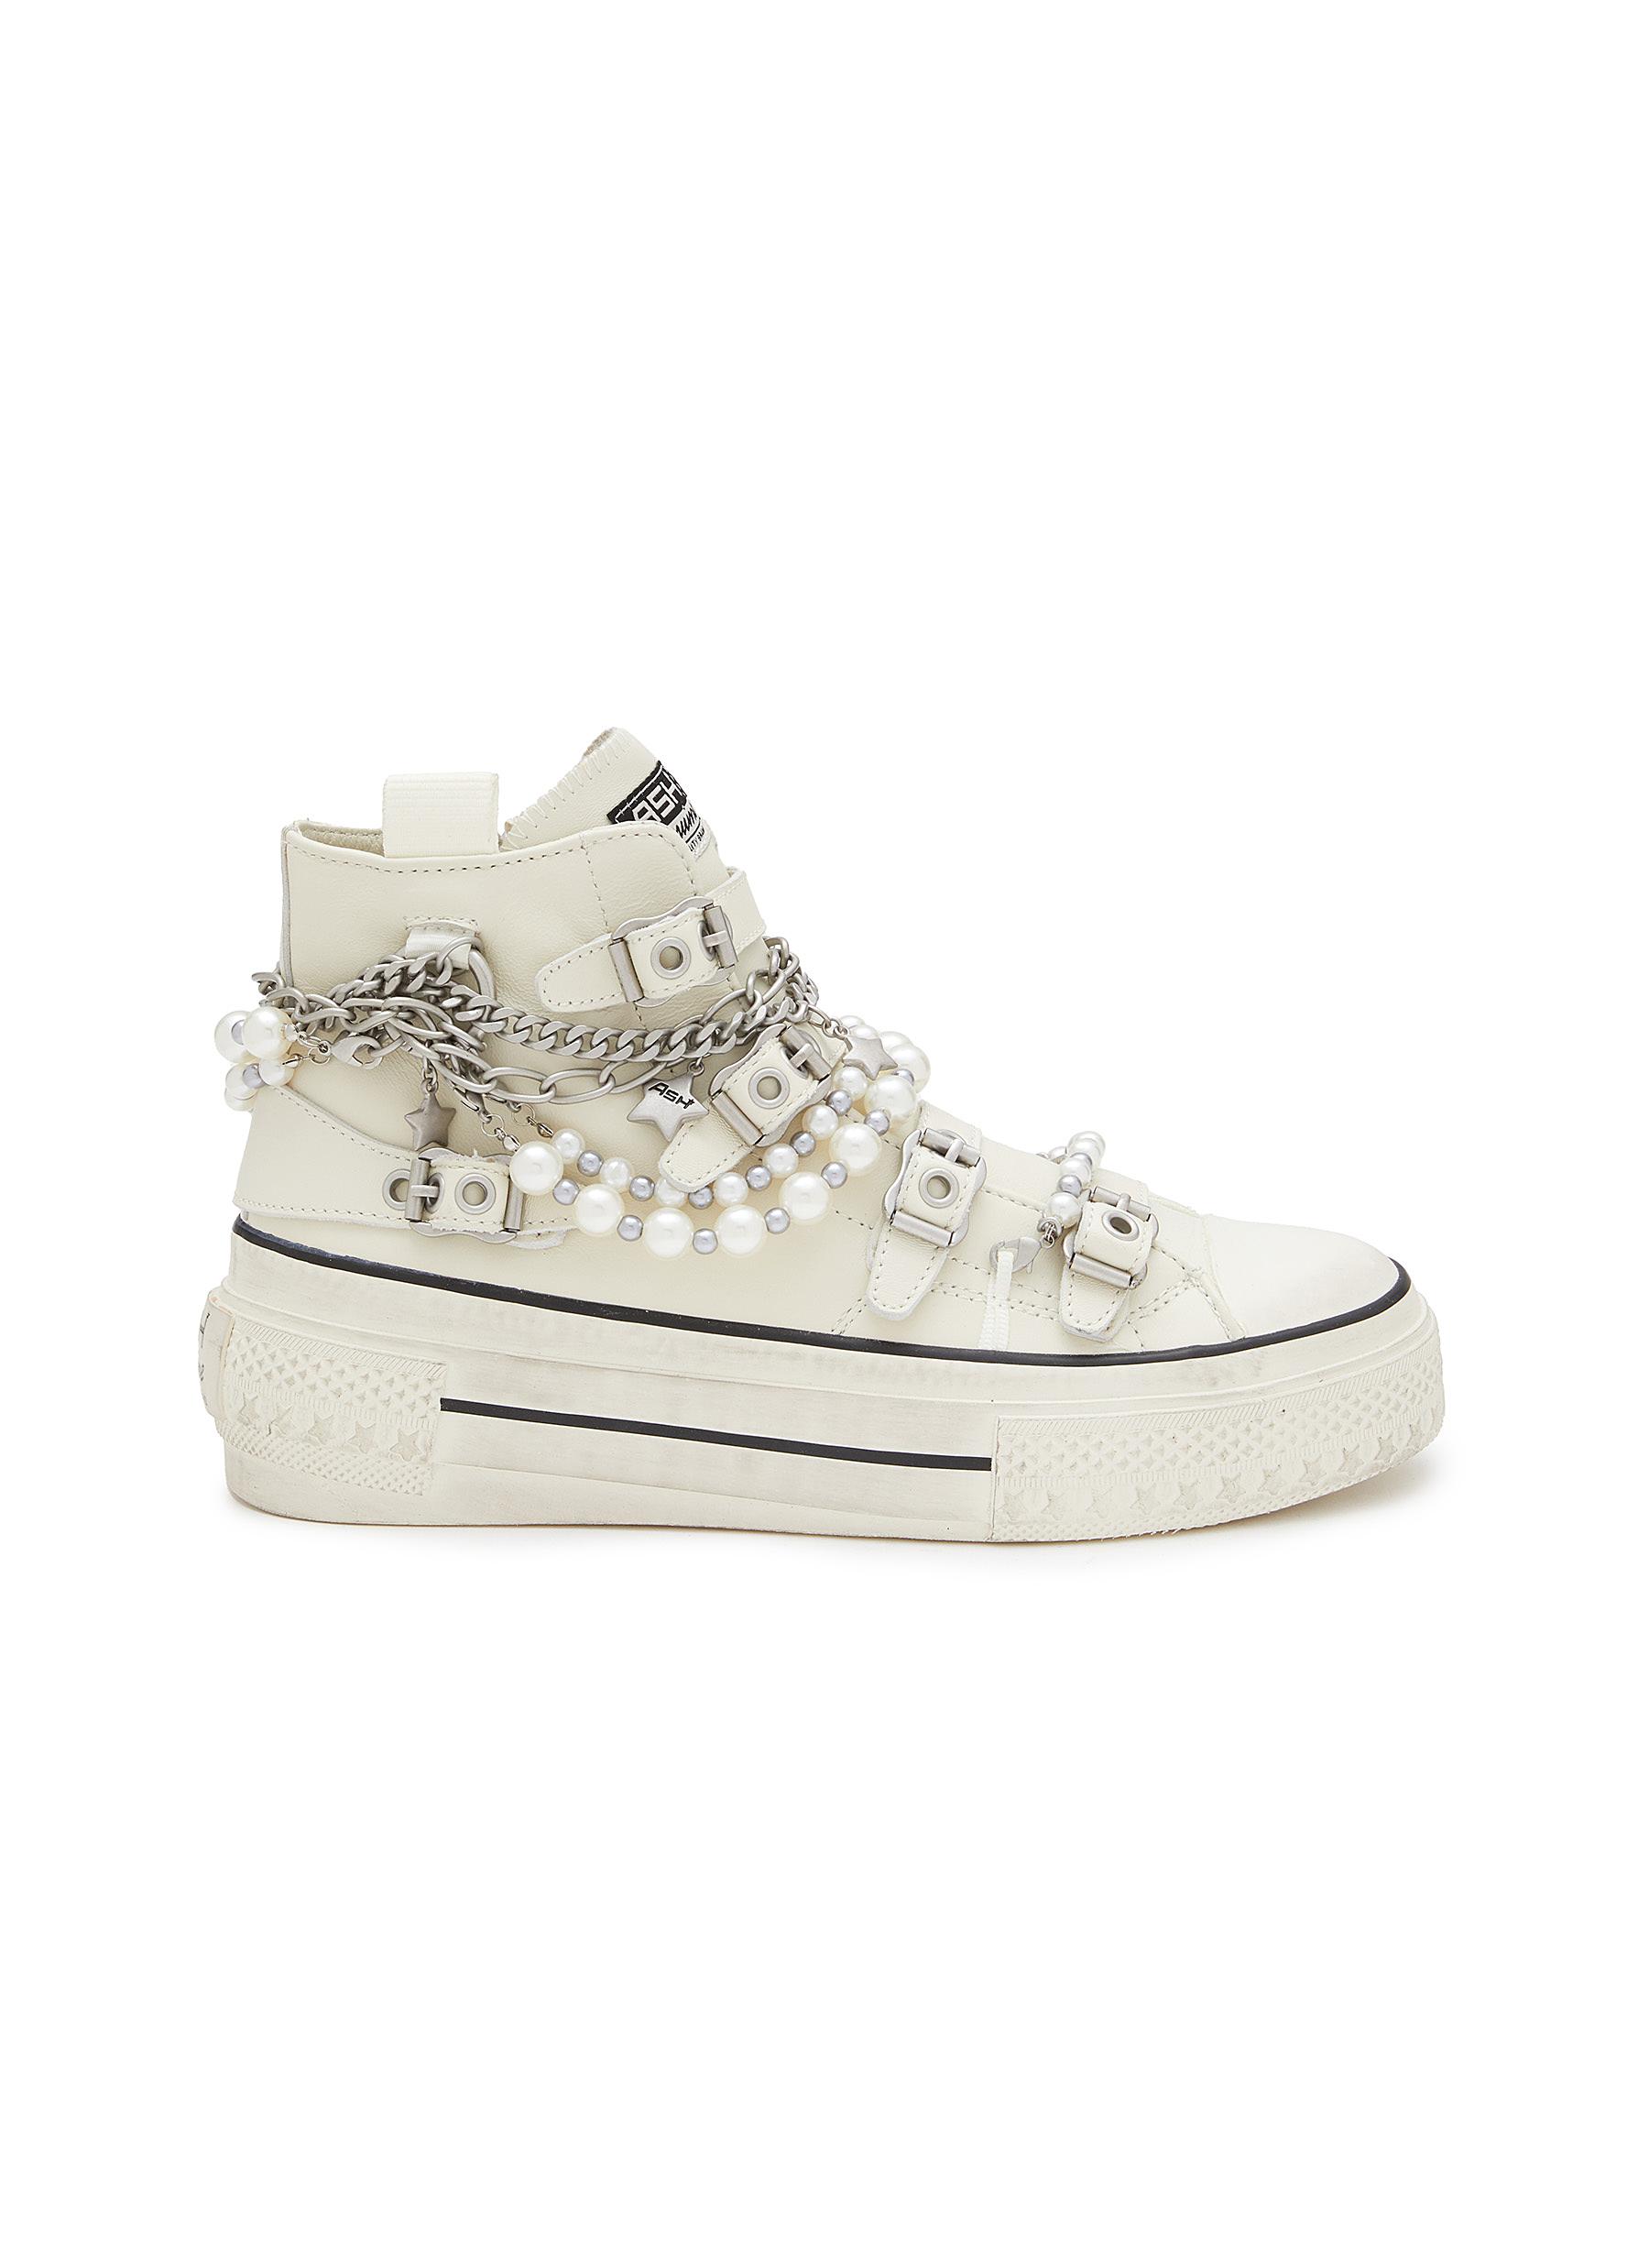 Rainbow Chain Embellished Leather High-Top Sneakers